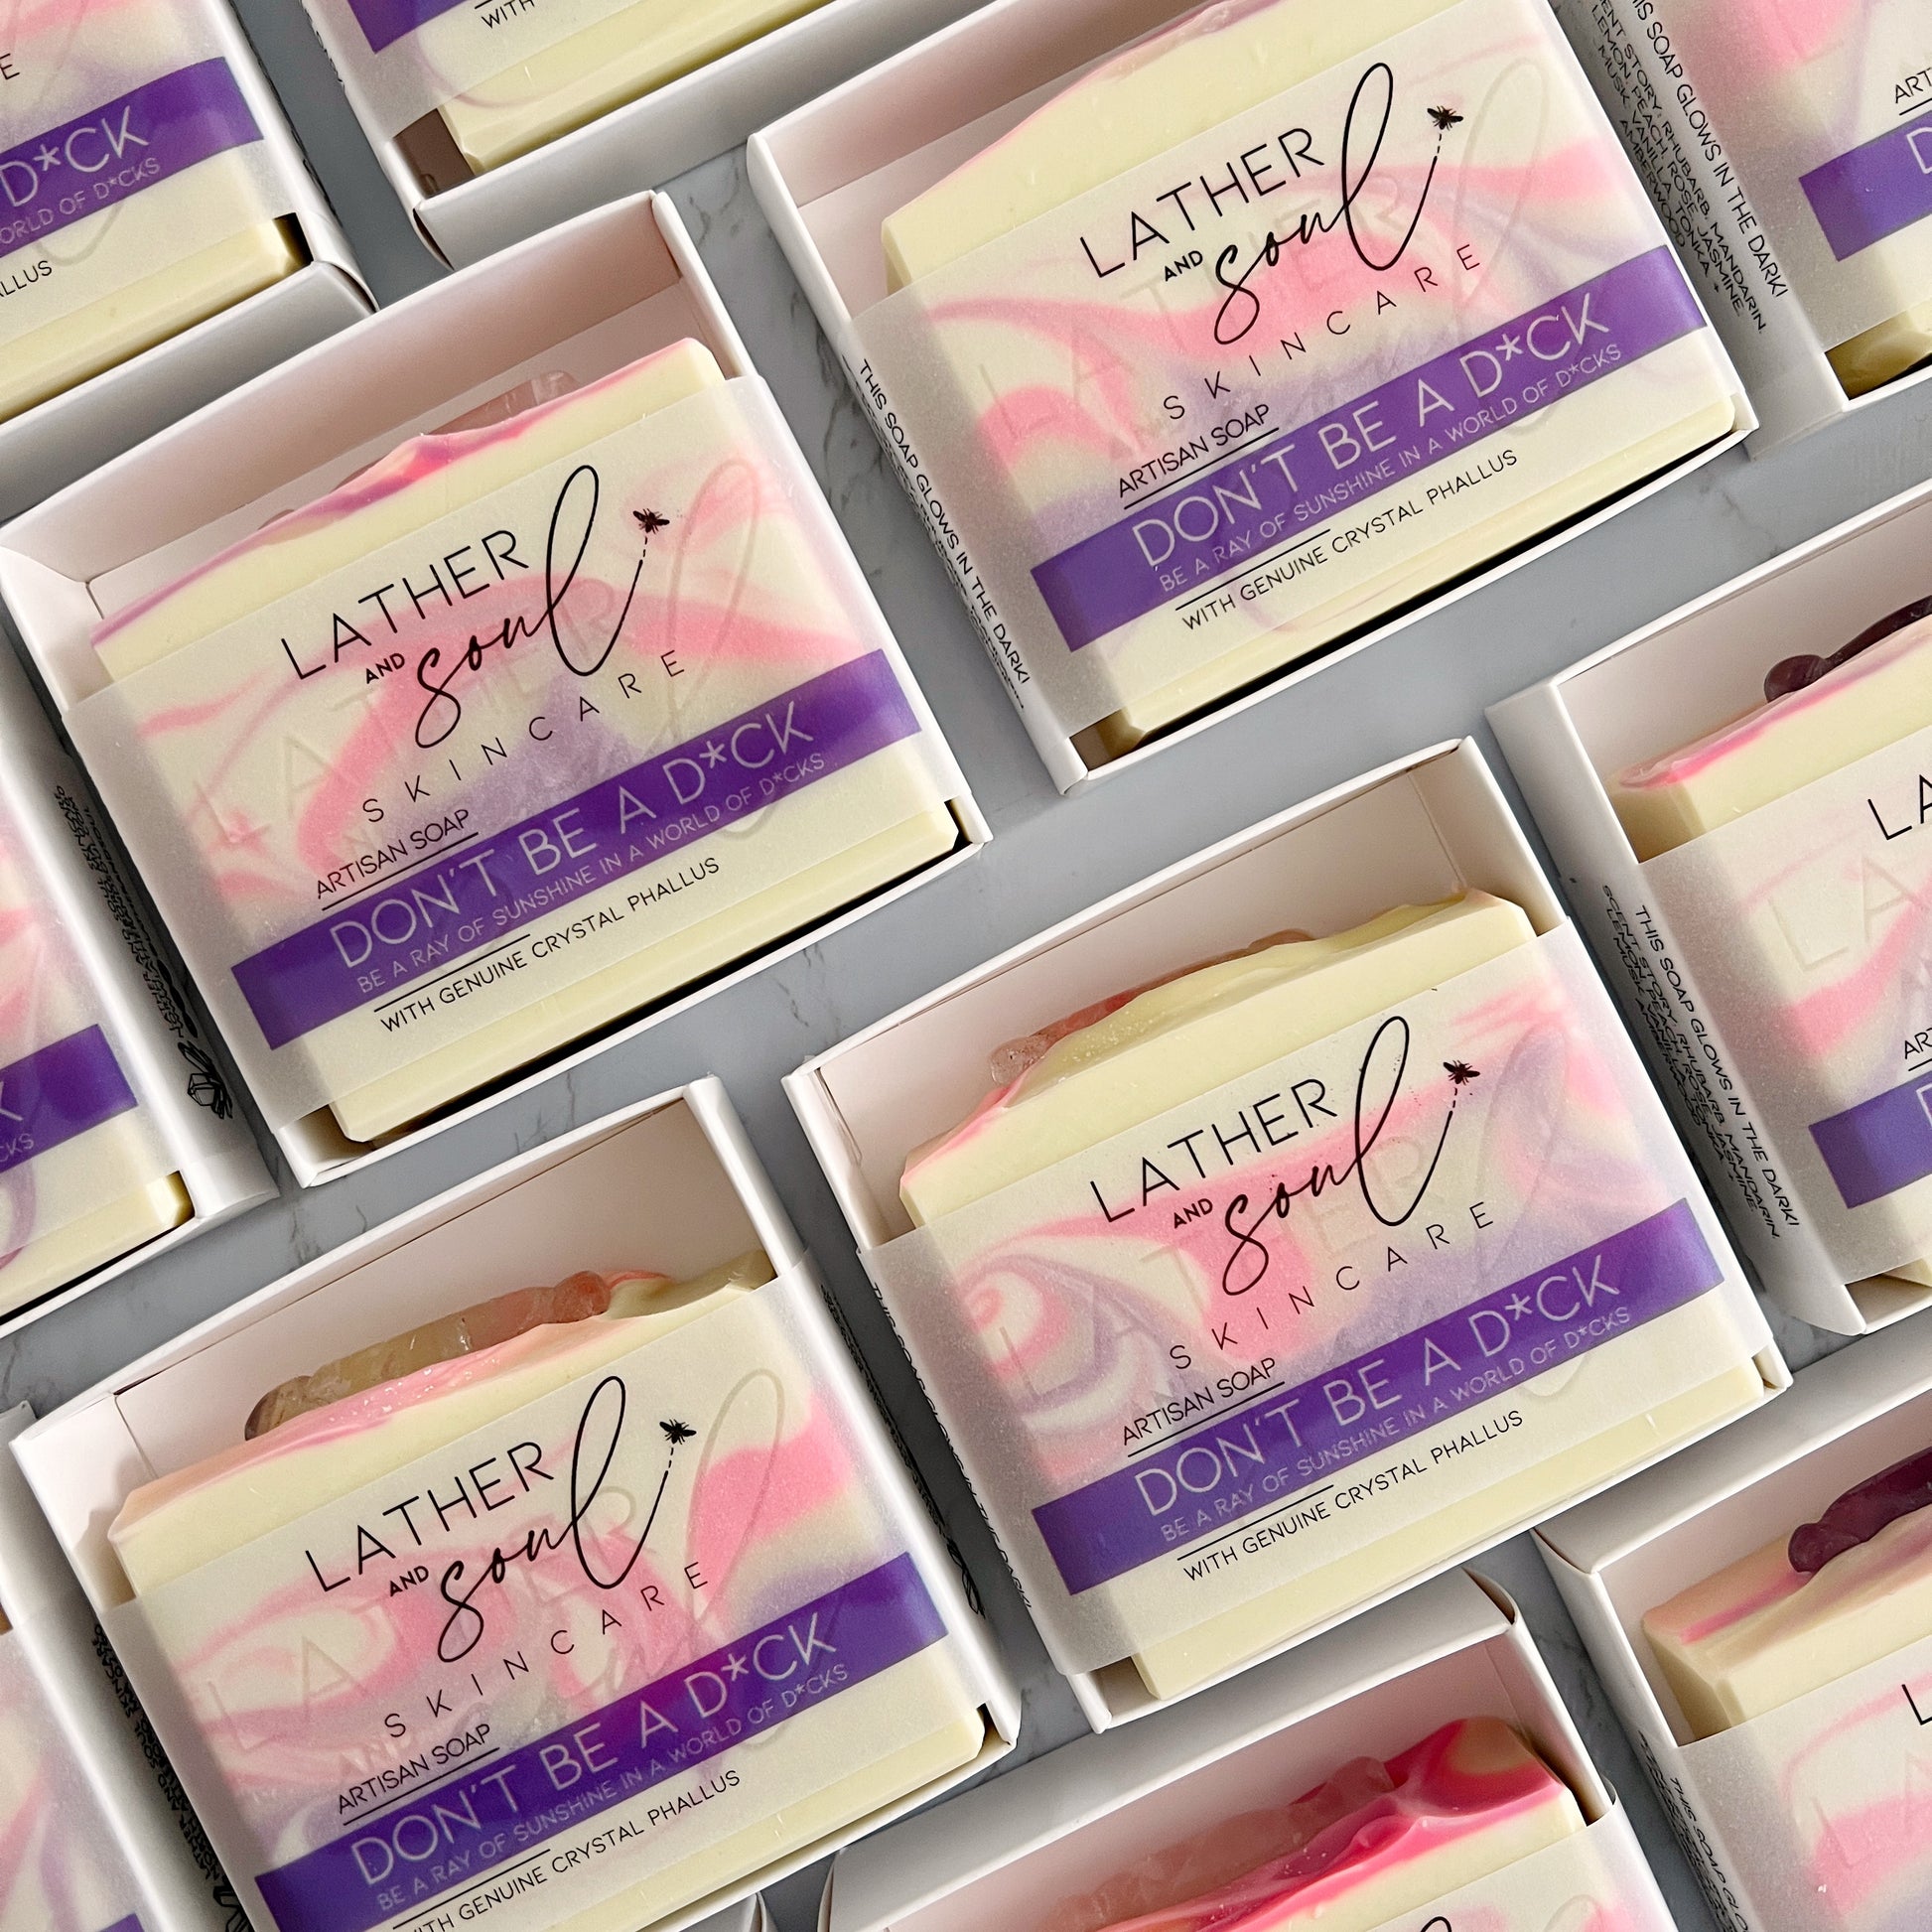 Funny "Don't Be A D*ck" crystal soaps, handmade by Lather and Soul with organic and vegan ingredients